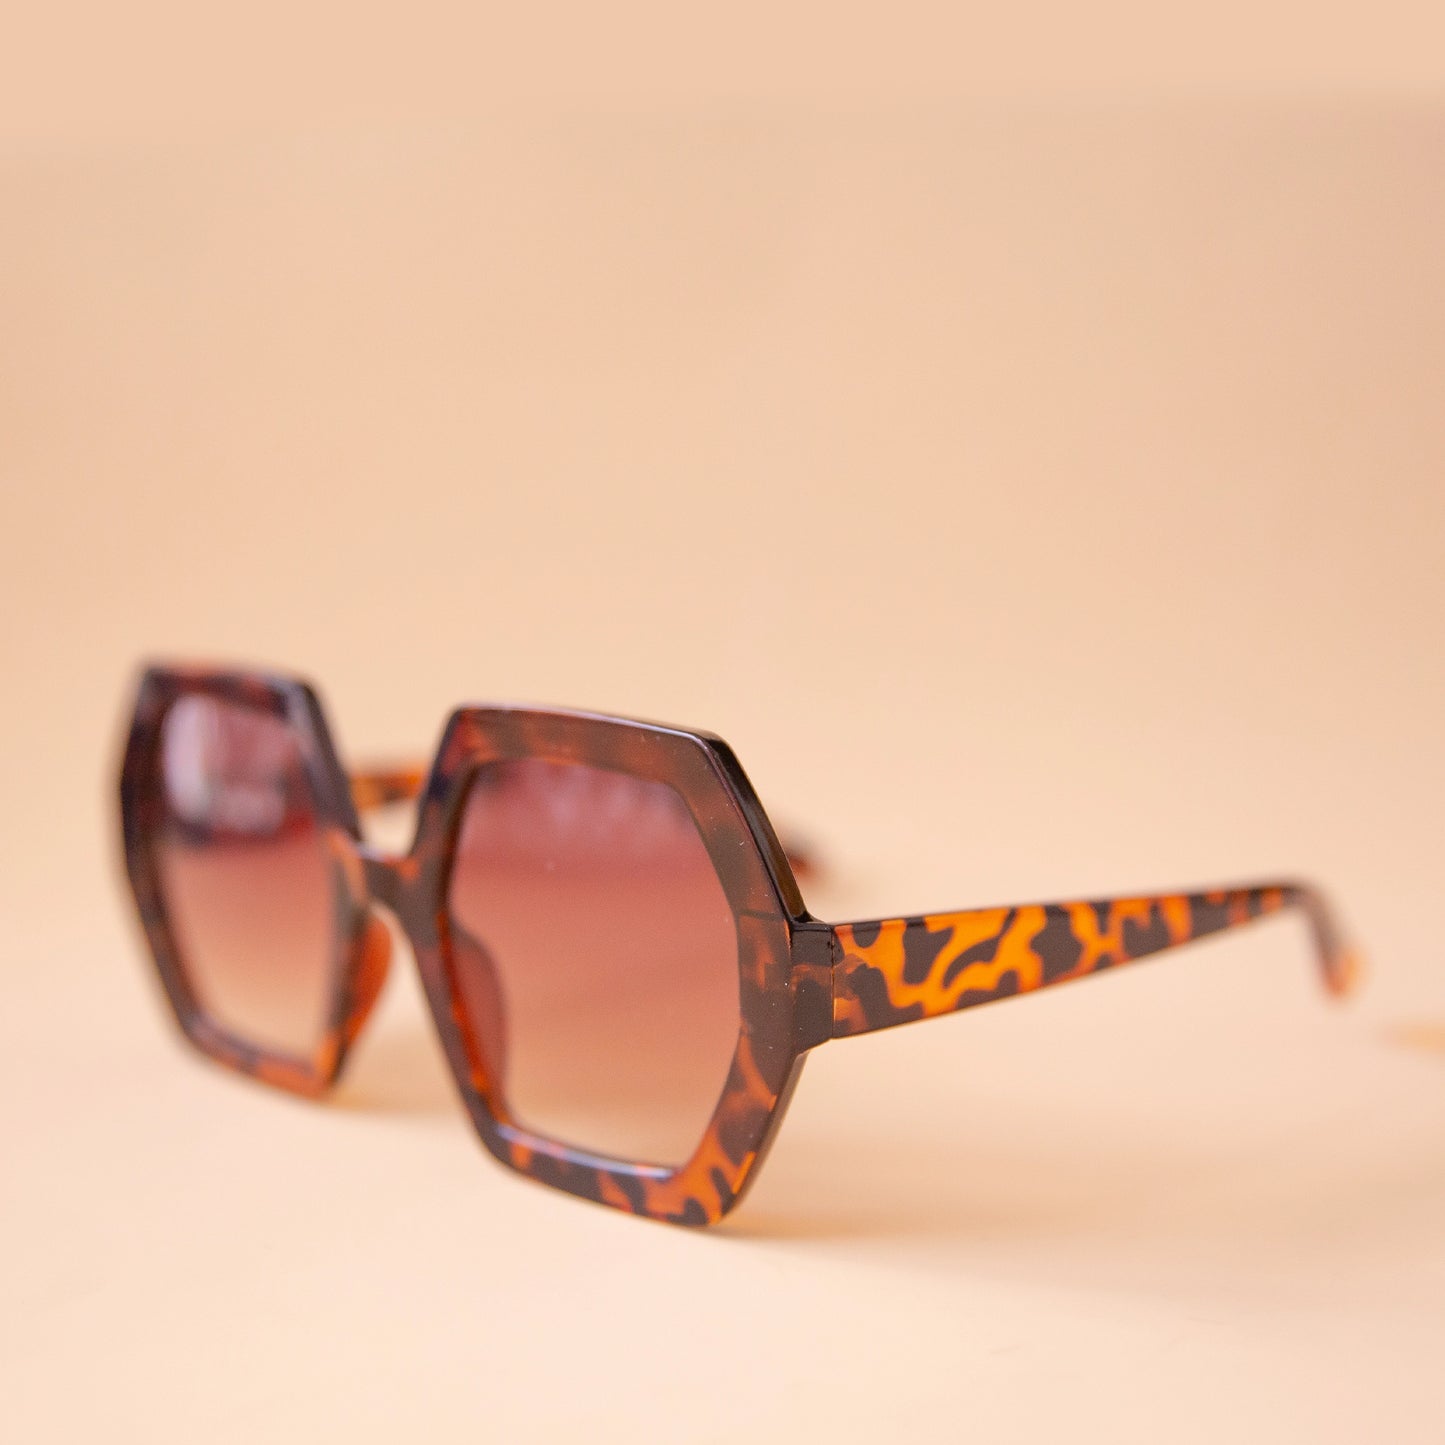 On a peachy background is a pair of hexagon shaped tortoise sunglasses with brown lenses.